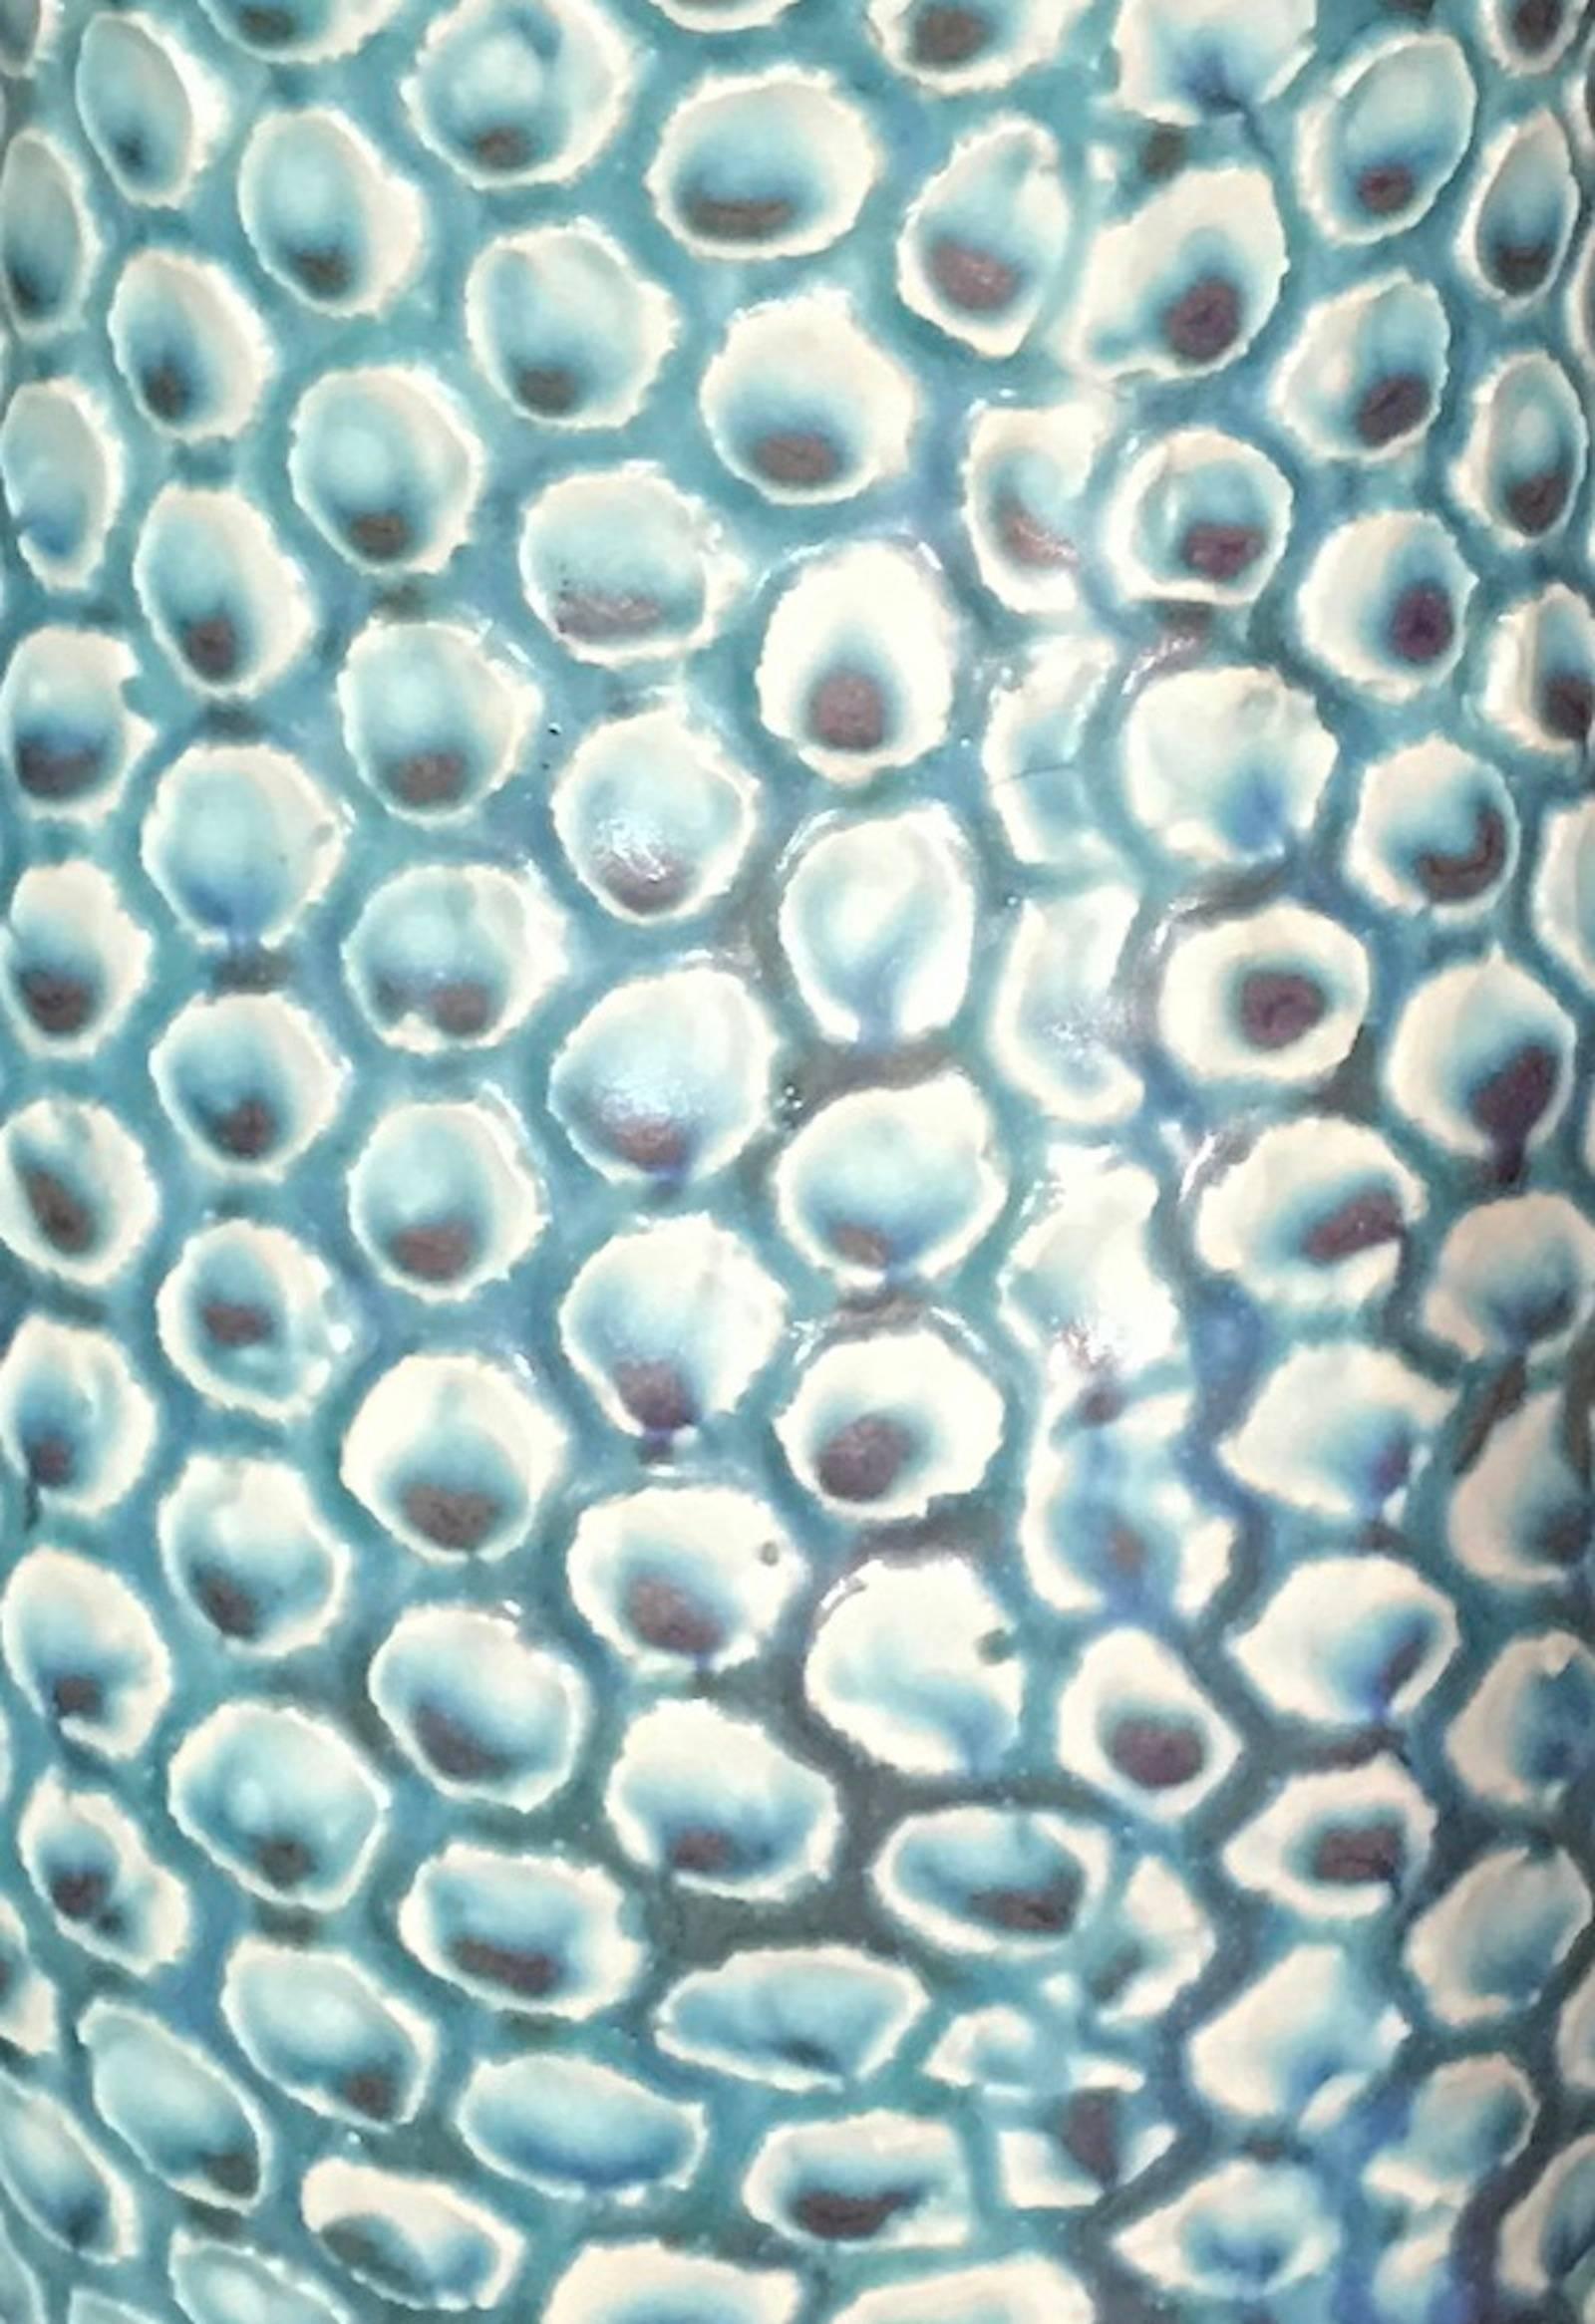 Contemporary Thailand turquoise in color vase.
Overall fish scale pattern design.
Sits well with  smaller size (S4765).
